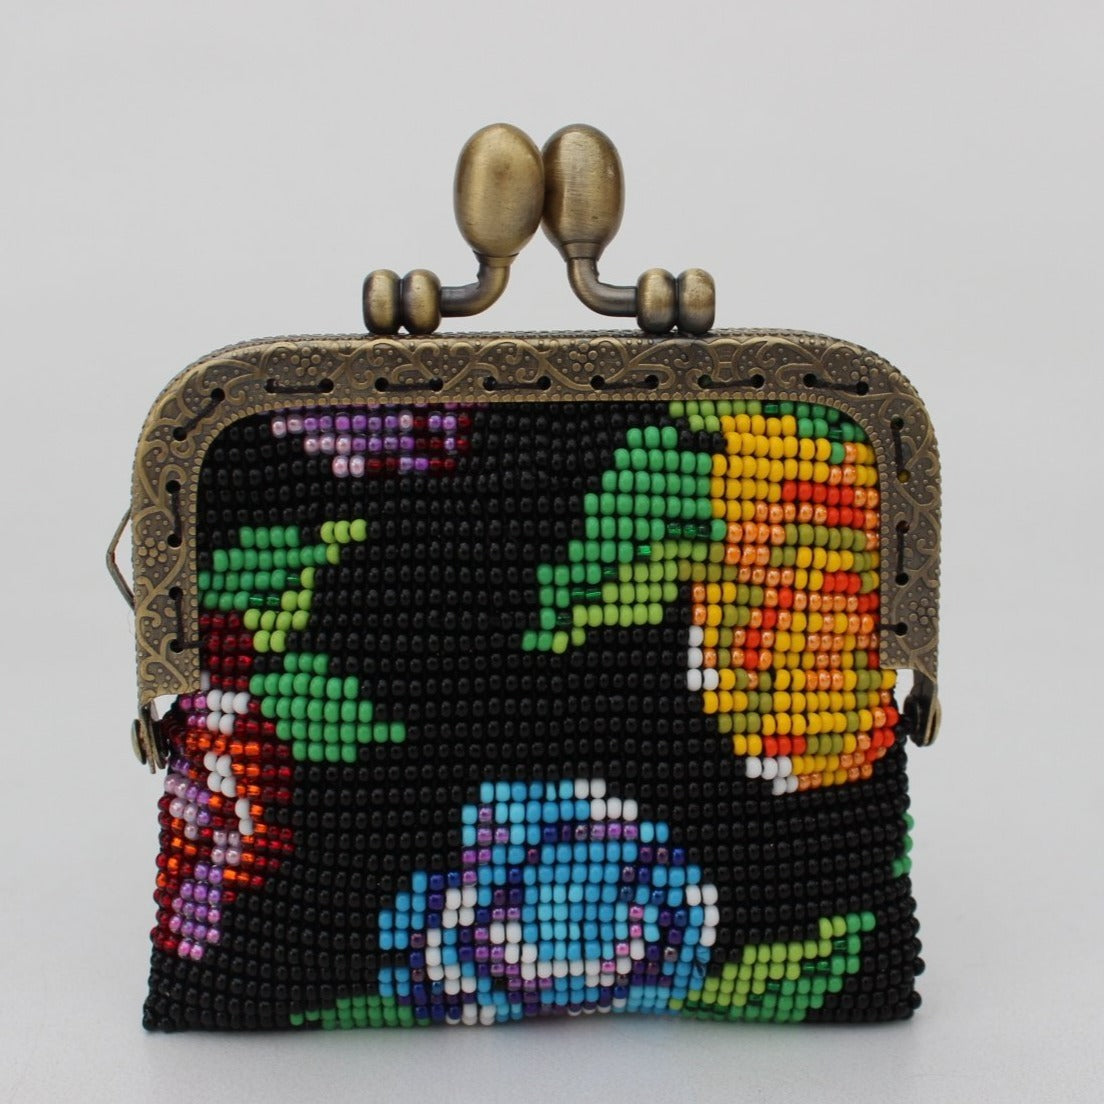 Glass Bead Coin Purse With Metal Frame - Flowers